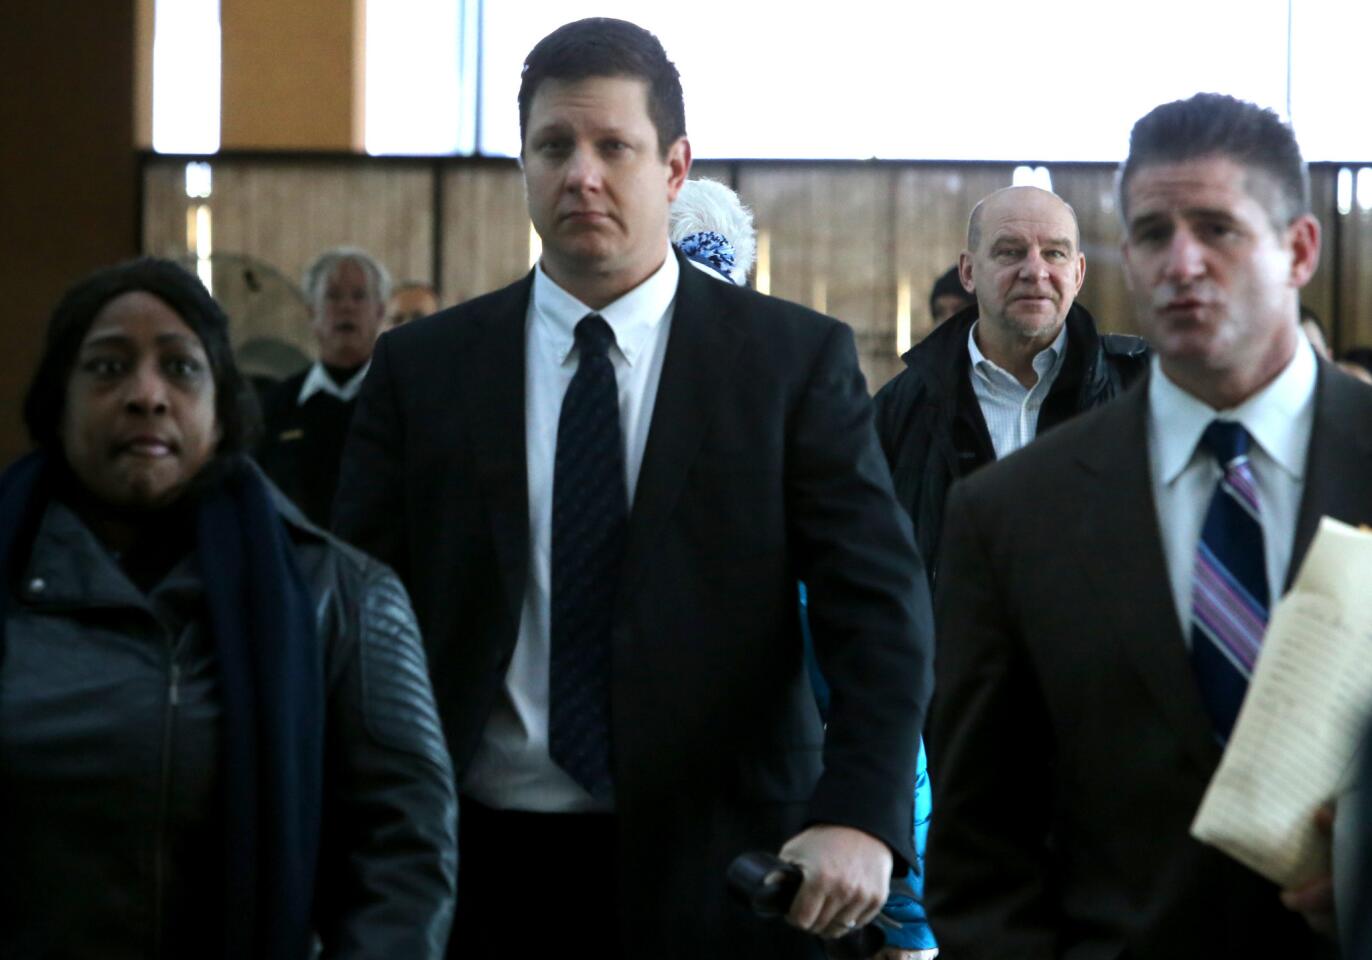 Chicago police Officer Jason Van Dyke, center, arrives at the Leighton Criminal Court Building on Dec. 18, 2015, for a hearing announcing his indictment on six counts of first-degree murder and one count of official misconduct for fatally shooting 17-year-old Laquan McDonald.